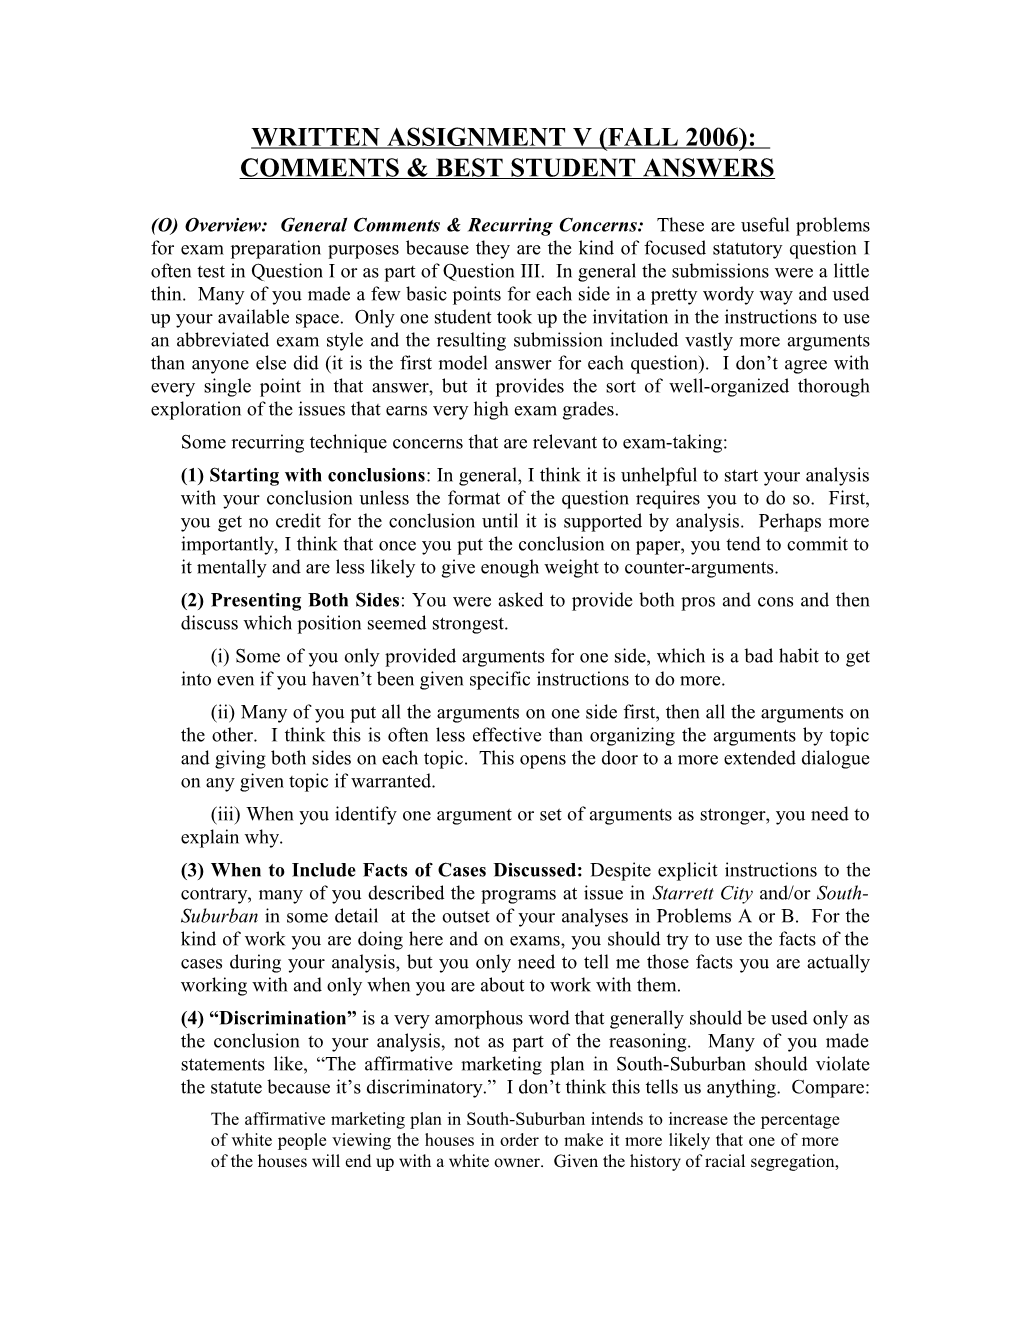 Comments & Best Student Answers